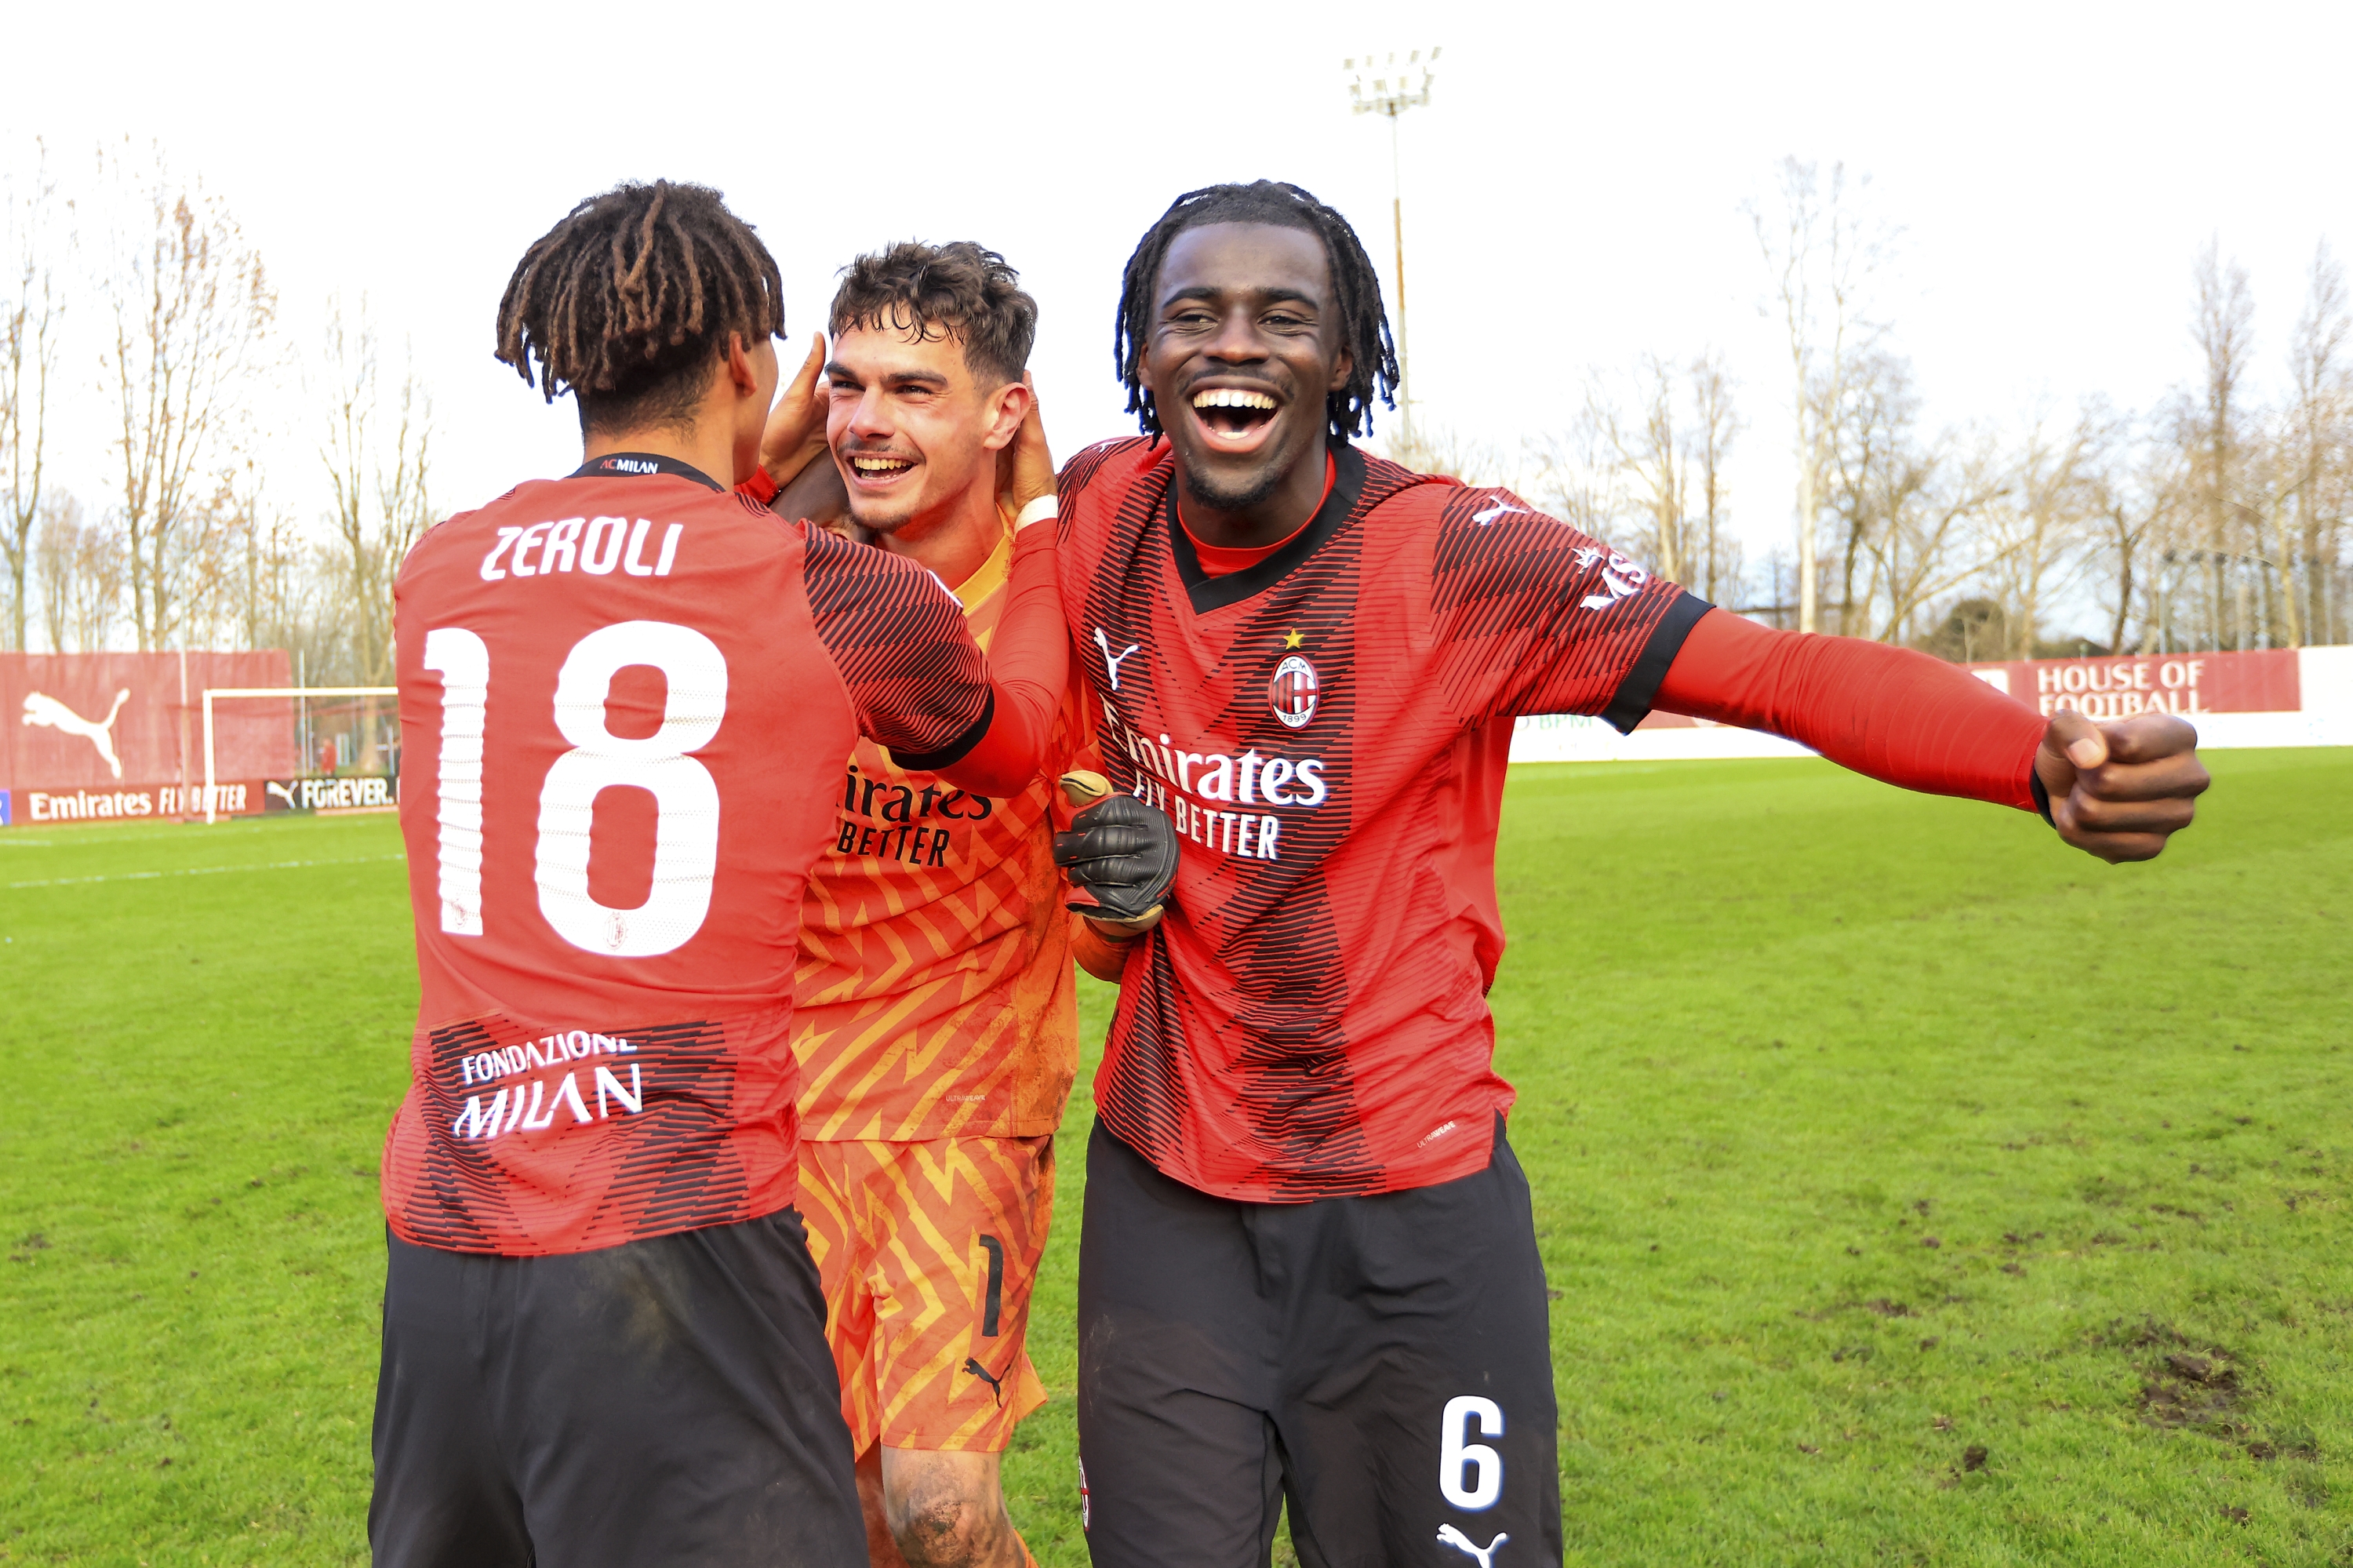 MILAN, ITALY - FEBRUARY 28: (L-R) Kevin Zeroli of AC Milan, Noah Raveyre and Clinton Nsiala Makengo celebrates the win at end of   the UEFA Youth League Round of 16 tie between AC Milan U19 and Braga U19 at Centro Sportivo Vismara on February 28, 2024 in Milan, Italy. (Photo by Giuseppe Cottini/AC Milan via Getty Images)